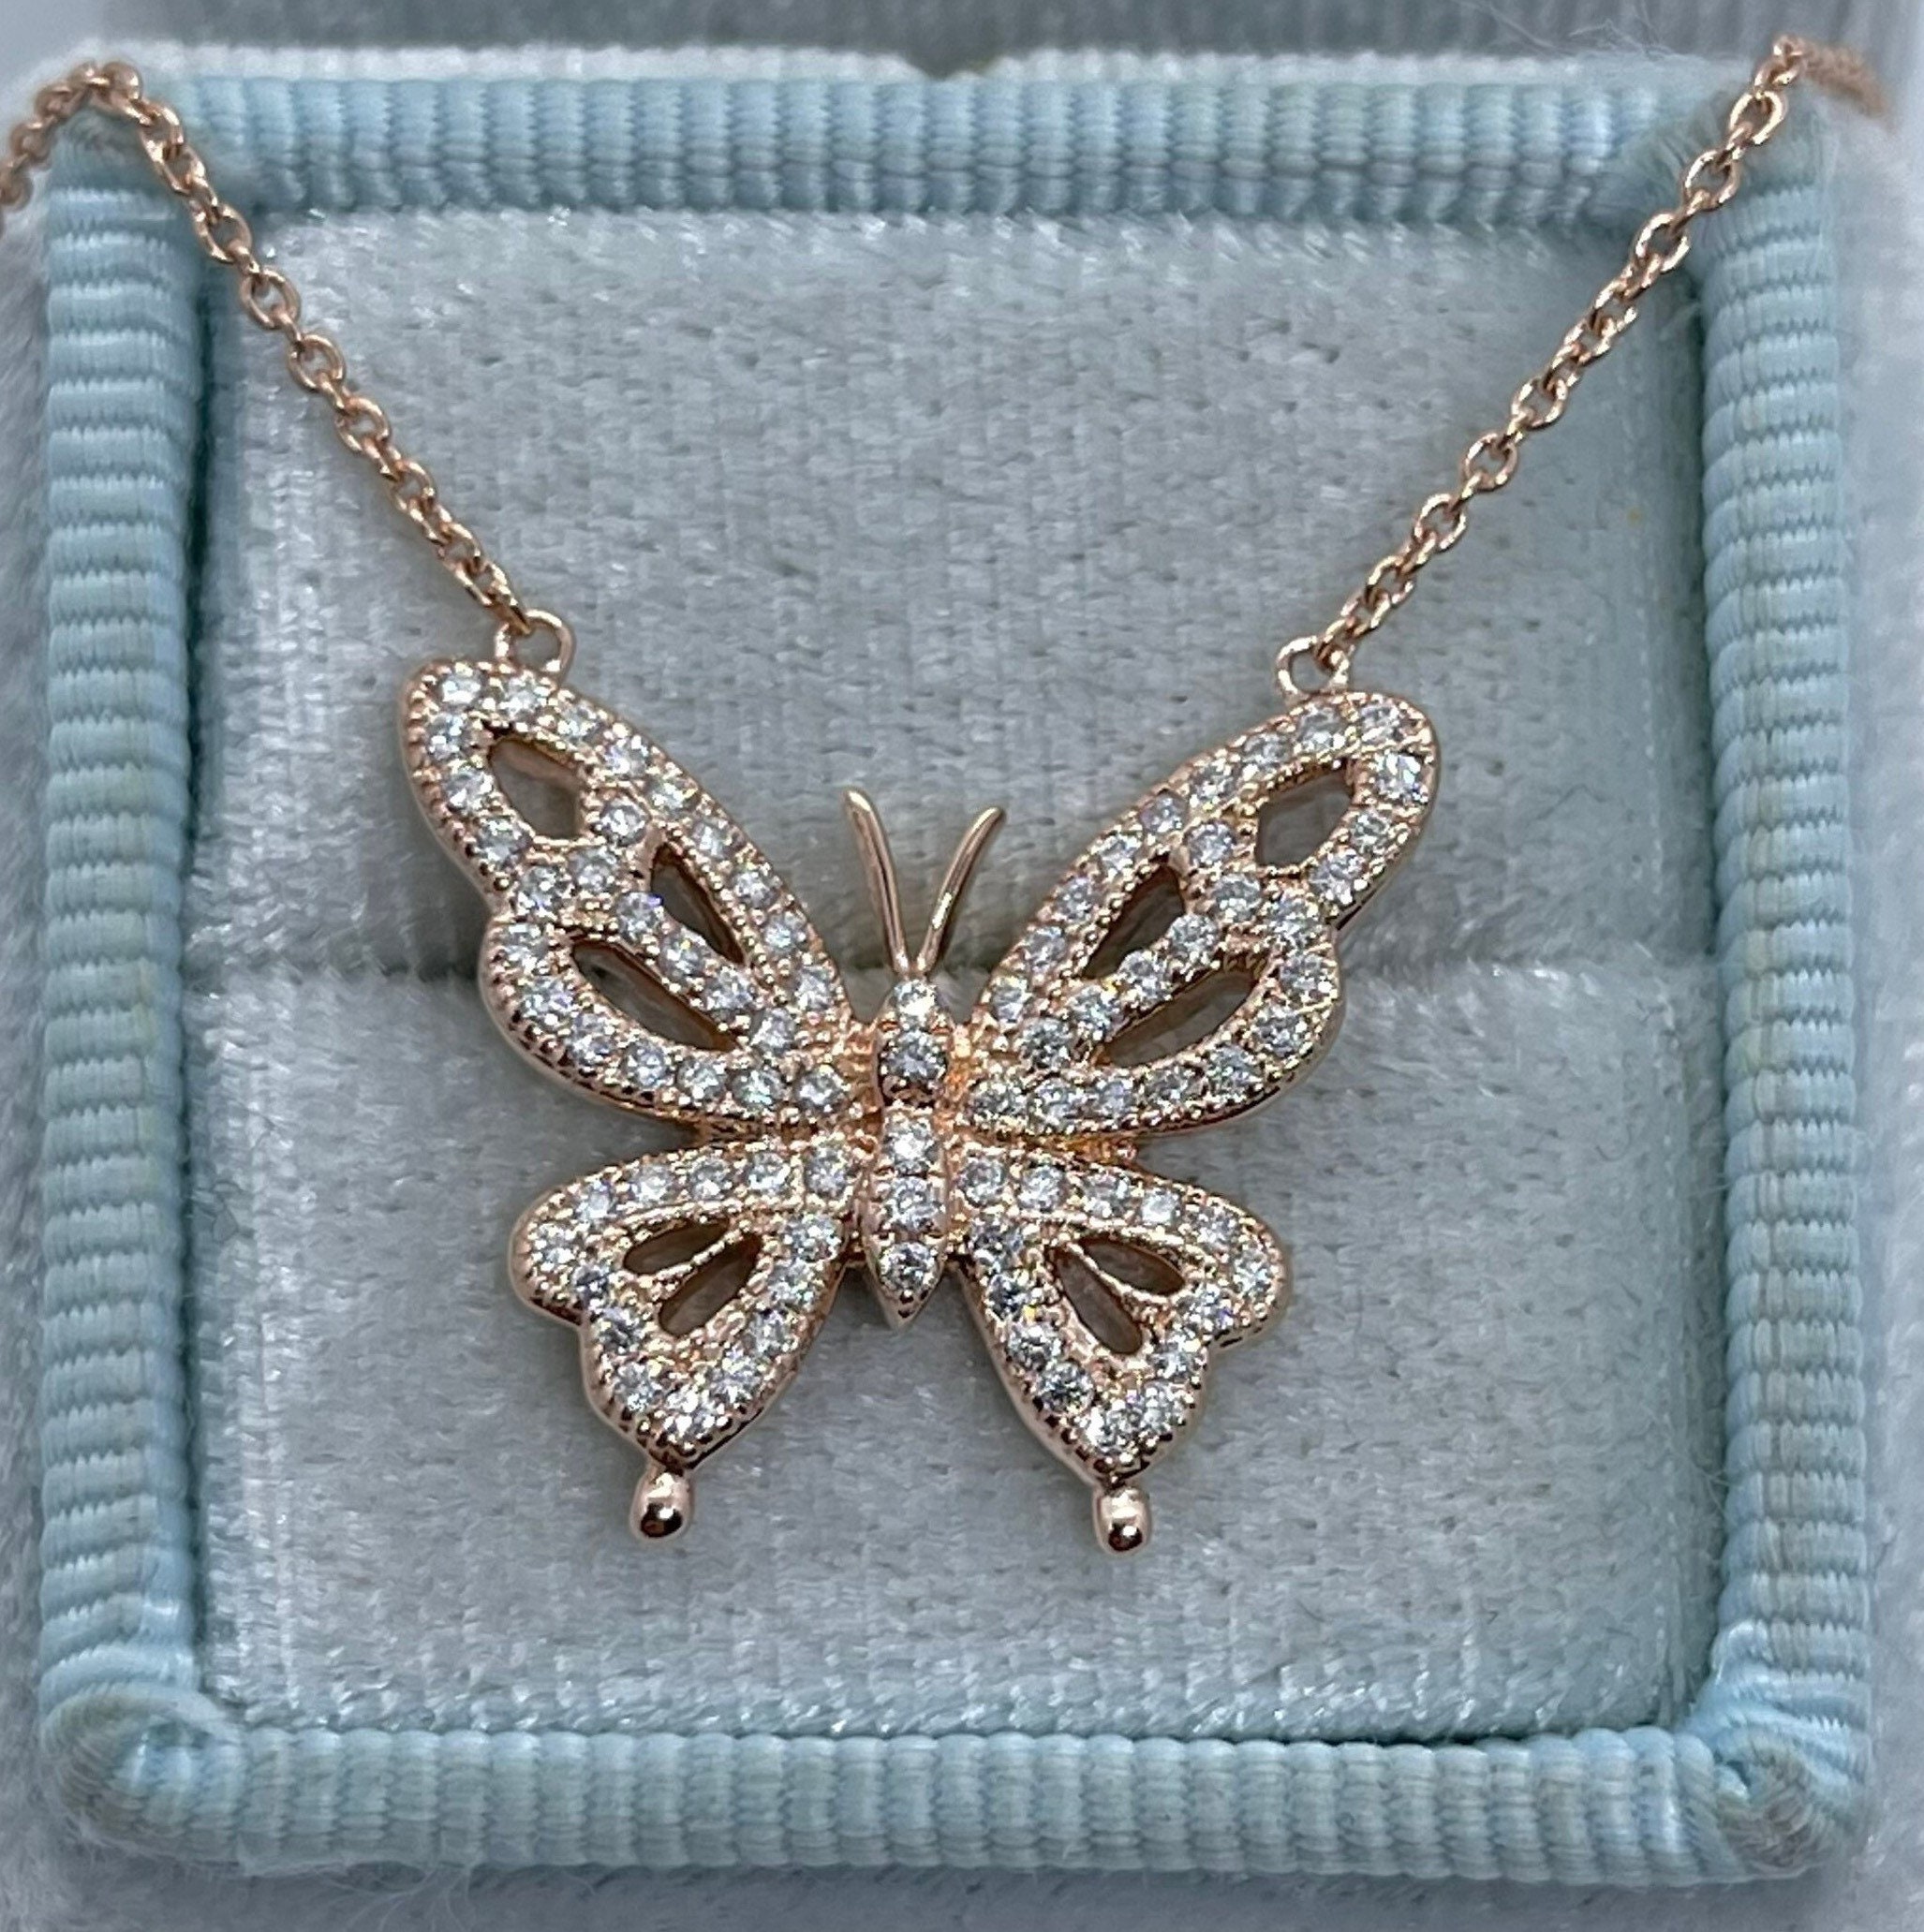 Sparkling Butterfly Diamond Butterfly Pendant With Rhinestone Accents  Elegant Crystal Charm Choker For Womens Jewelry Collection From Tjewelry,  $1.07